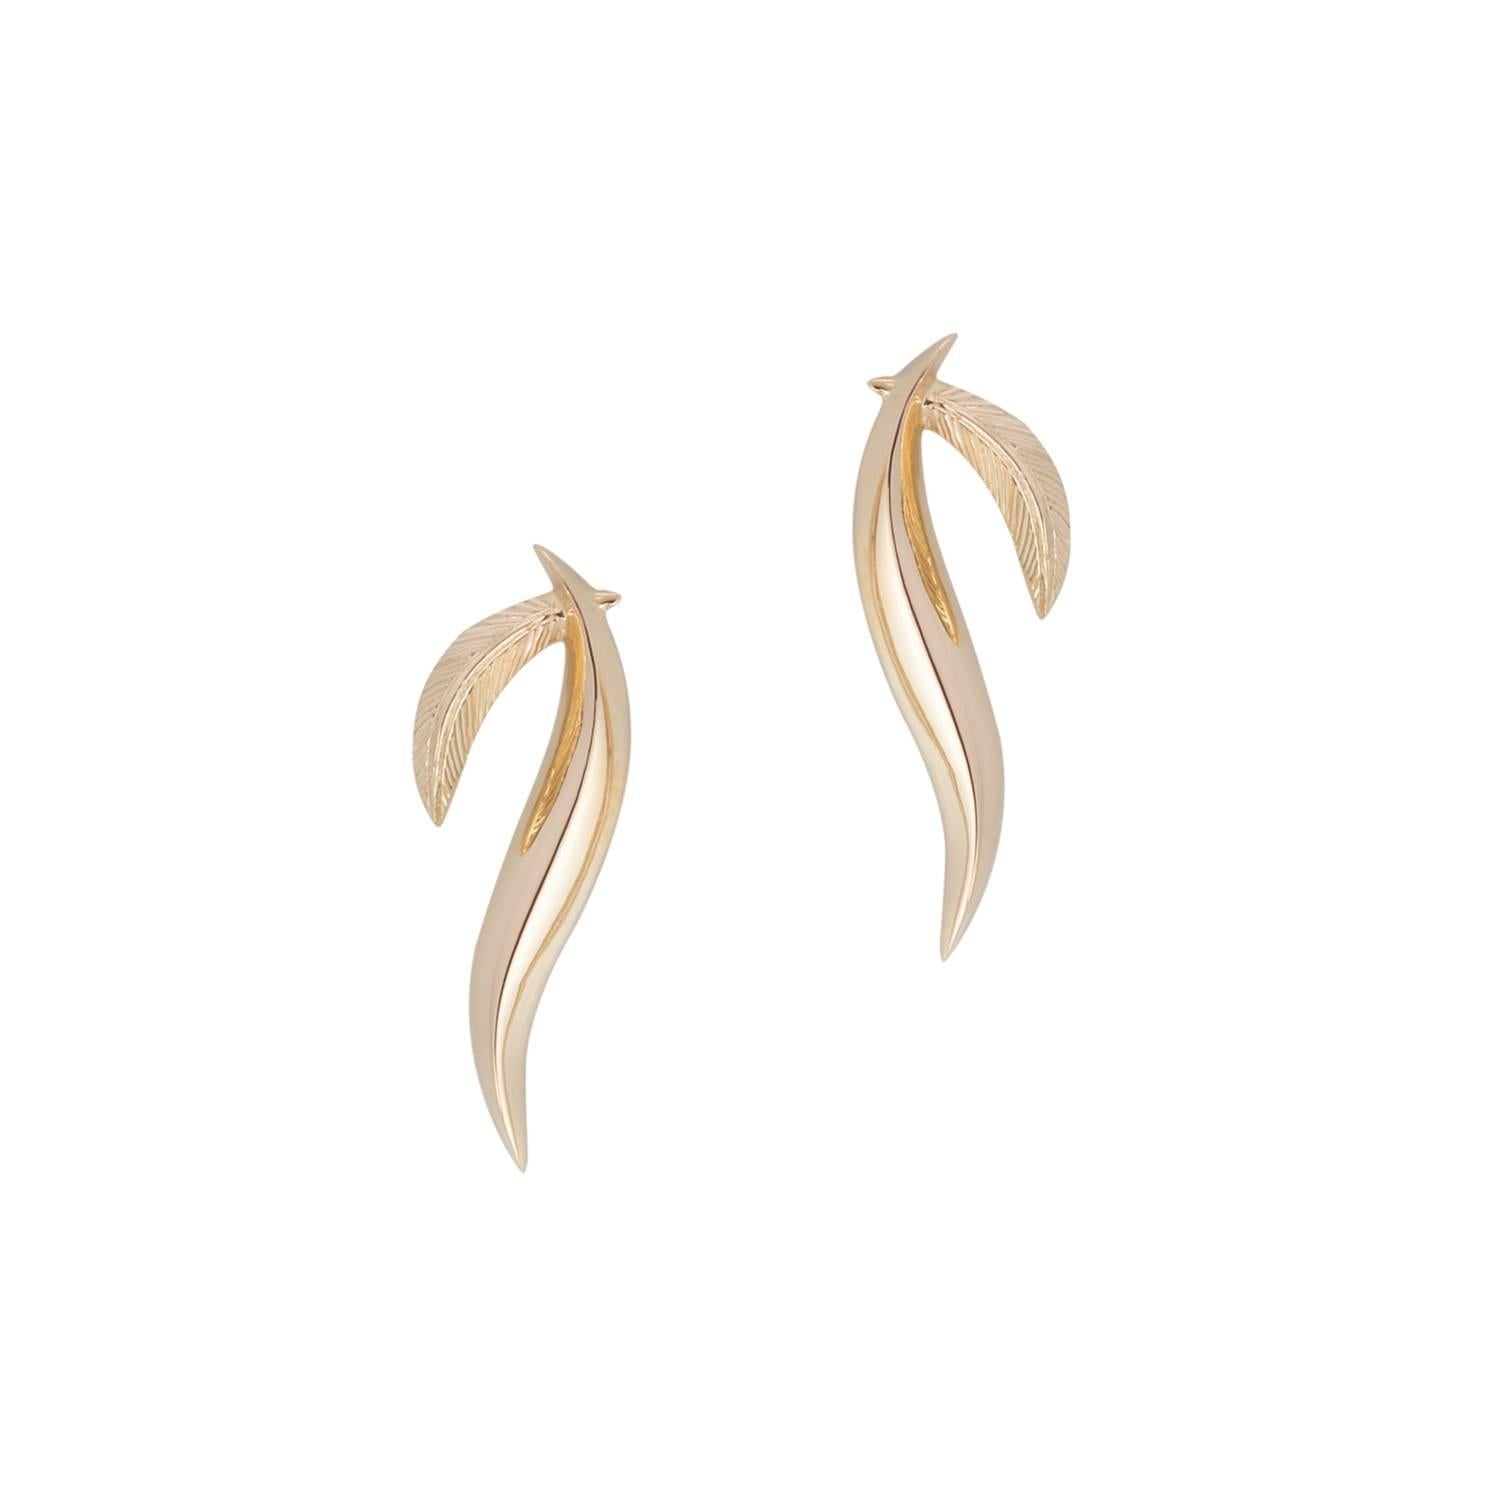 A minimal wearable every day luxury earring with subtle details in the engraved feather and lively shape of the feathers. The earrings can be worn in multiple ways. Made in the UK in 18 carat yellow gold. 

Signifying renewal, resilience, rarity and